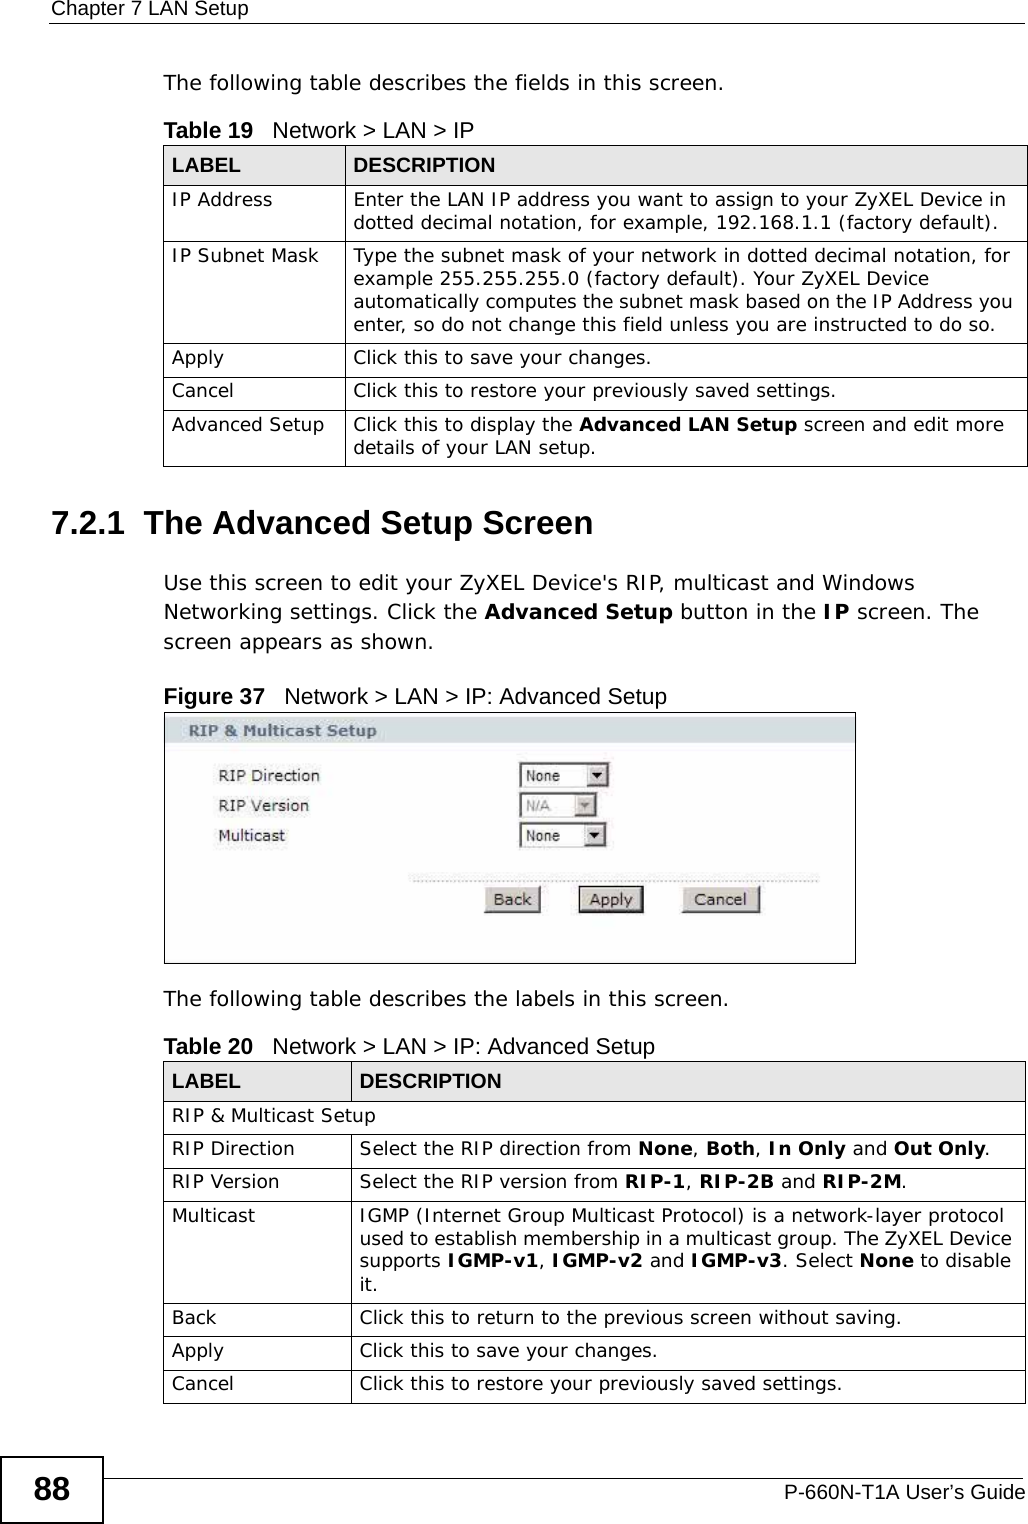 Chapter 7 LAN SetupP-660N-T1A User’s Guide88The following table describes the fields in this screen.  7.2.1  The Advanced Setup Screen Use this screen to edit your ZyXEL Device&apos;s RIP, multicast and Windows Networking settings. Click the Advanced Setup button in the IP screen. The screen appears as shown.Figure 37   Network &gt; LAN &gt; IP: Advanced SetupThe following table describes the labels in this screen.  Table 19   Network &gt; LAN &gt; IPLABEL DESCRIPTIONIP Address Enter the LAN IP address you want to assign to your ZyXEL Device in dotted decimal notation, for example, 192.168.1.1 (factory default). IP Subnet Mask  Type the subnet mask of your network in dotted decimal notation, for example 255.255.255.0 (factory default). Your ZyXEL Device automatically computes the subnet mask based on the IP Address you enter, so do not change this field unless you are instructed to do so.Apply Click this to save your changes.Cancel Click this to restore your previously saved settings.Advanced Setup Click this to display the Advanced LAN Setup screen and edit more details of your LAN setup.Table 20   Network &gt; LAN &gt; IP: Advanced SetupLABEL DESCRIPTIONRIP &amp; Multicast SetupRIP Direction Select the RIP direction from None, Both, In Only and Out Only.RIP Version Select the RIP version from RIP-1, RIP-2B and RIP-2M.Multicast IGMP (Internet Group Multicast Protocol) is a network-layer protocol used to establish membership in a multicast group. The ZyXEL Device supports IGMP-v1, IGMP-v2 and IGMP-v3. Select None to disable it.Back Click this to return to the previous screen without saving.Apply Click this to save your changes.Cancel Click this to restore your previously saved settings.